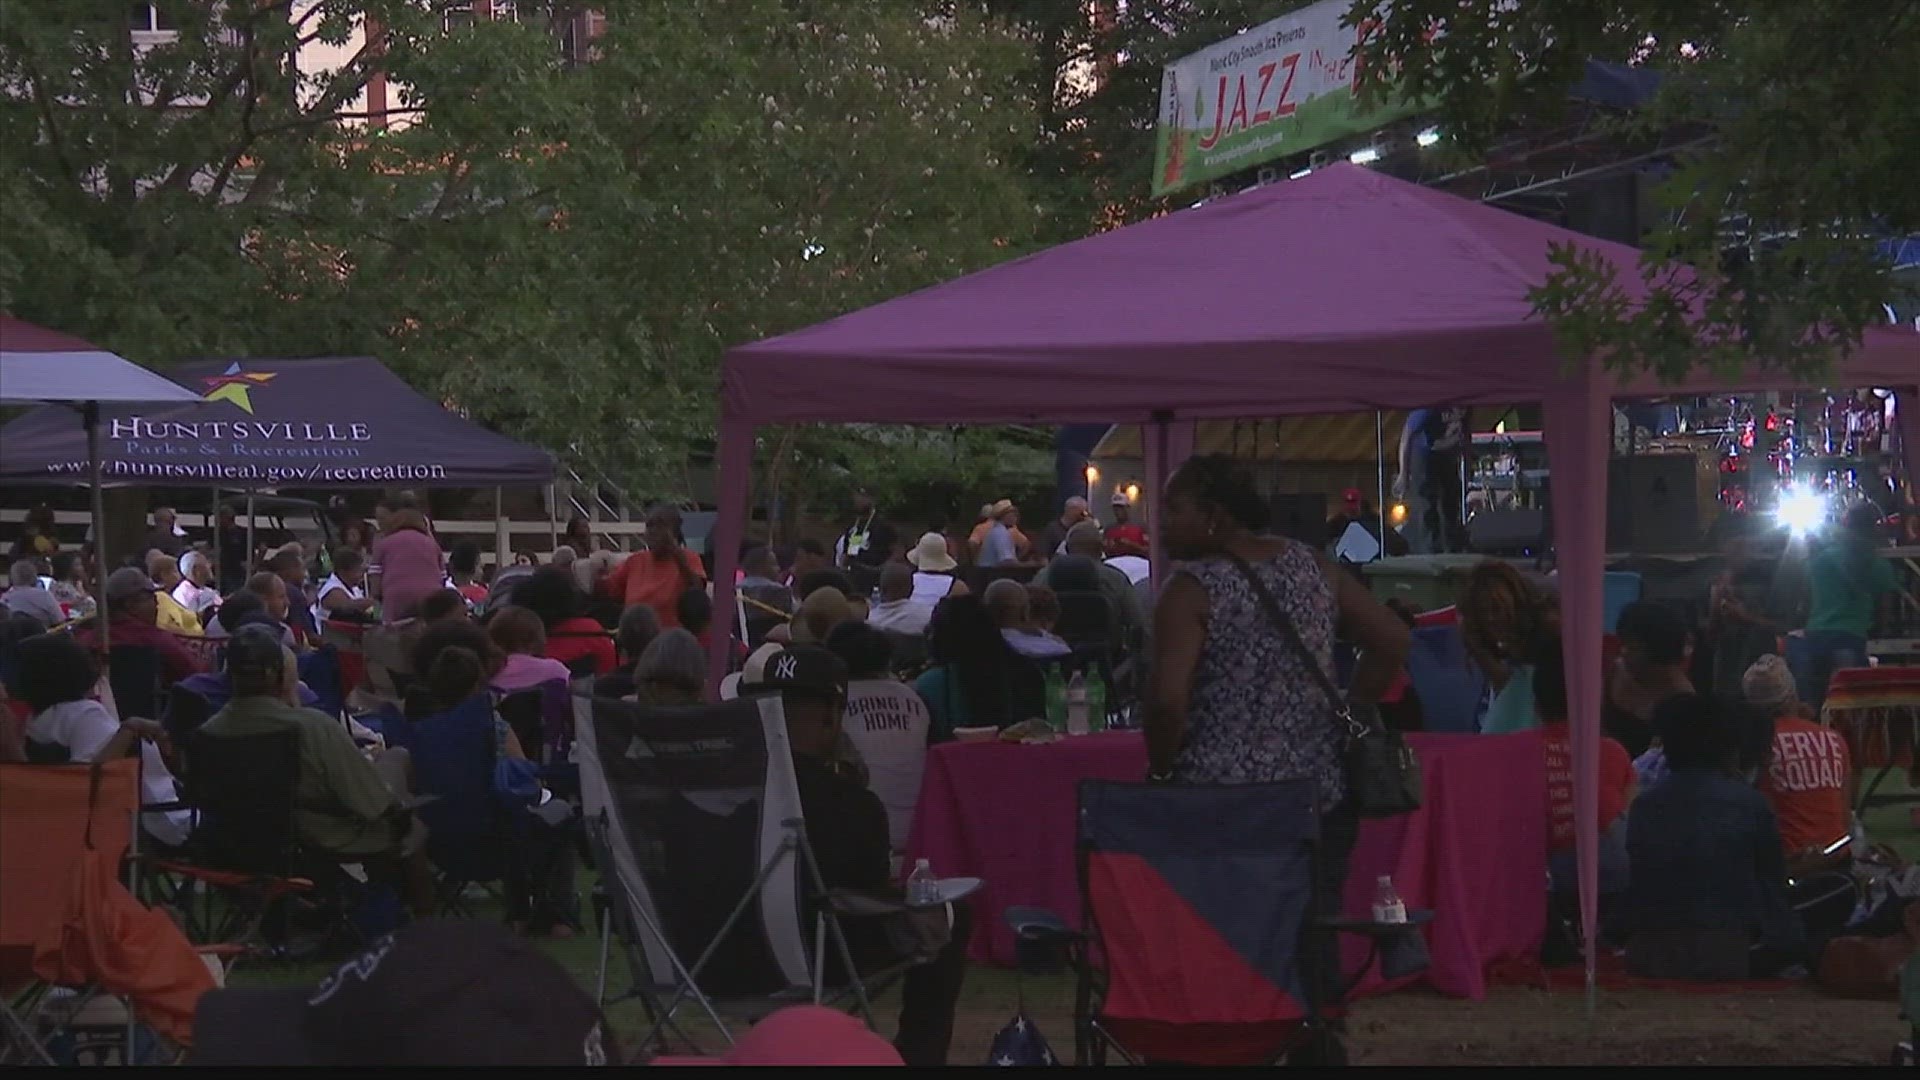 Jazz in the Park returns this September for a Sunday concert series.